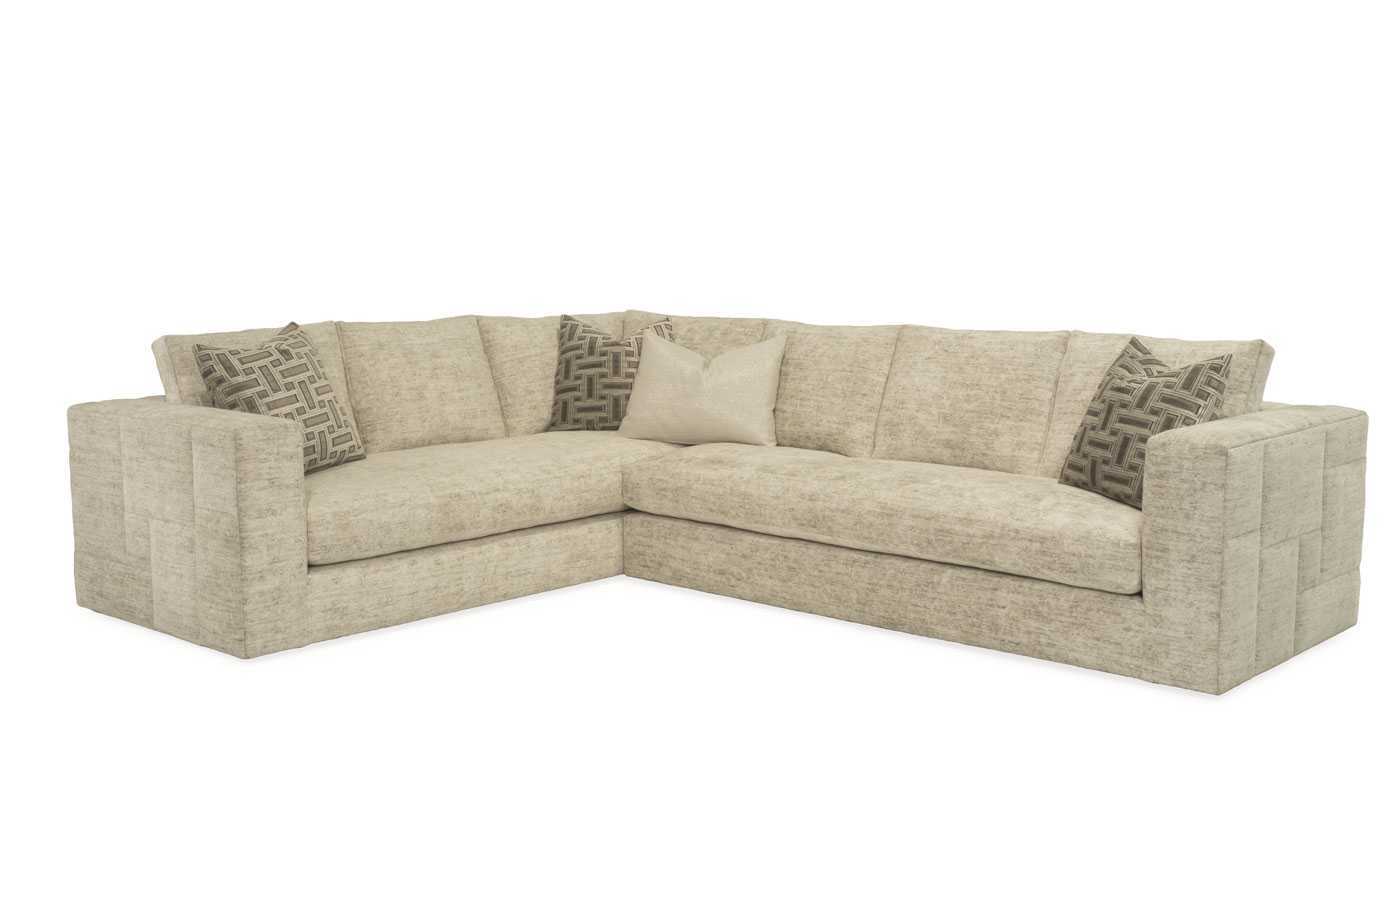 Rene cazares full feature filled L shape sofa